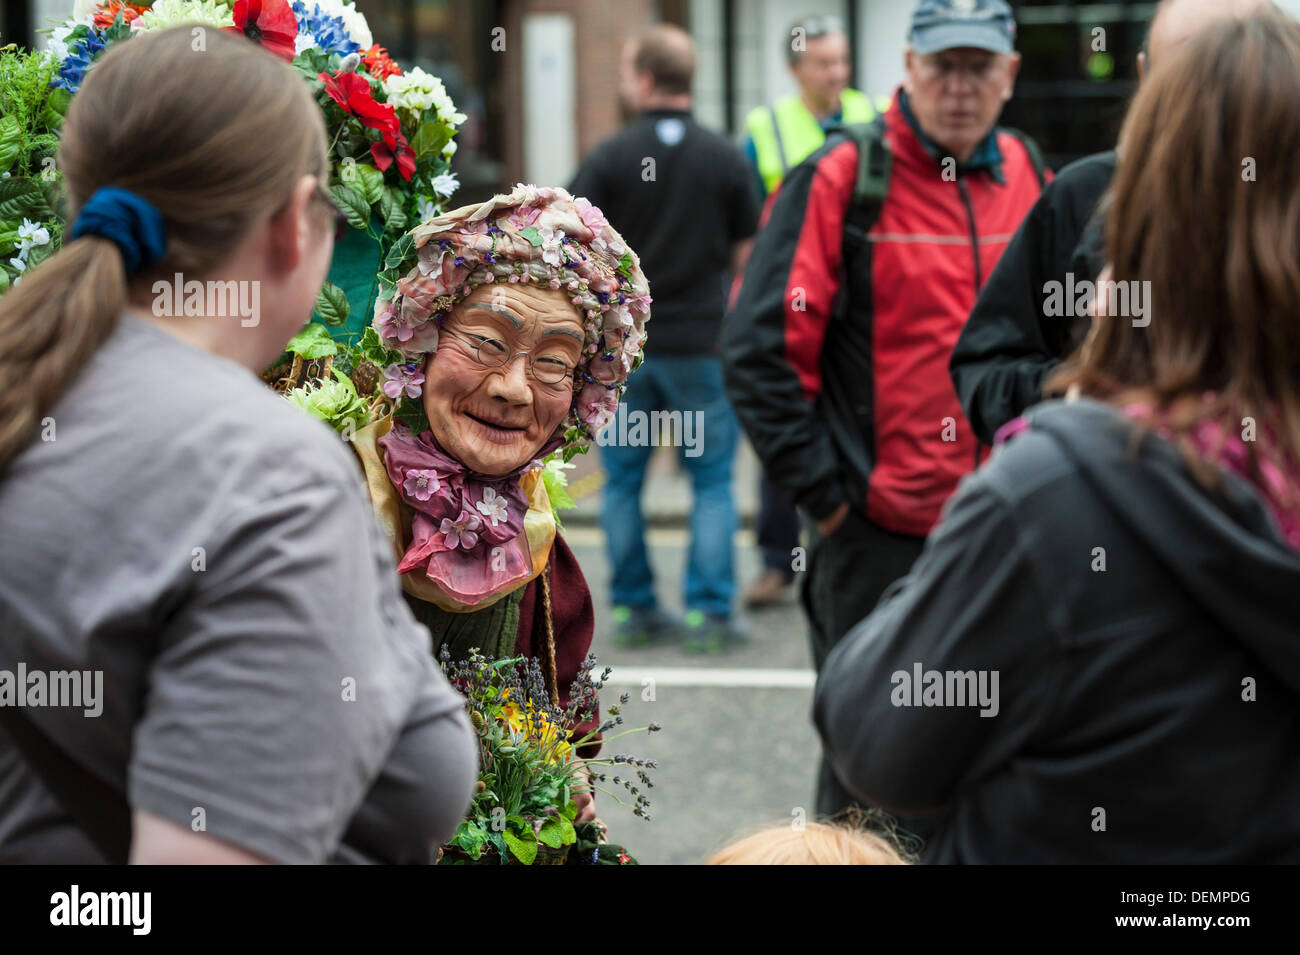 Witham, Essex, UK. 21st September 2013. Busy Lizzy, a performer at the Witham International Puppet Festival, chats to members of the public in the High Street.  Photographer: Gordon Scammell/Alamy Live News Stock Photo